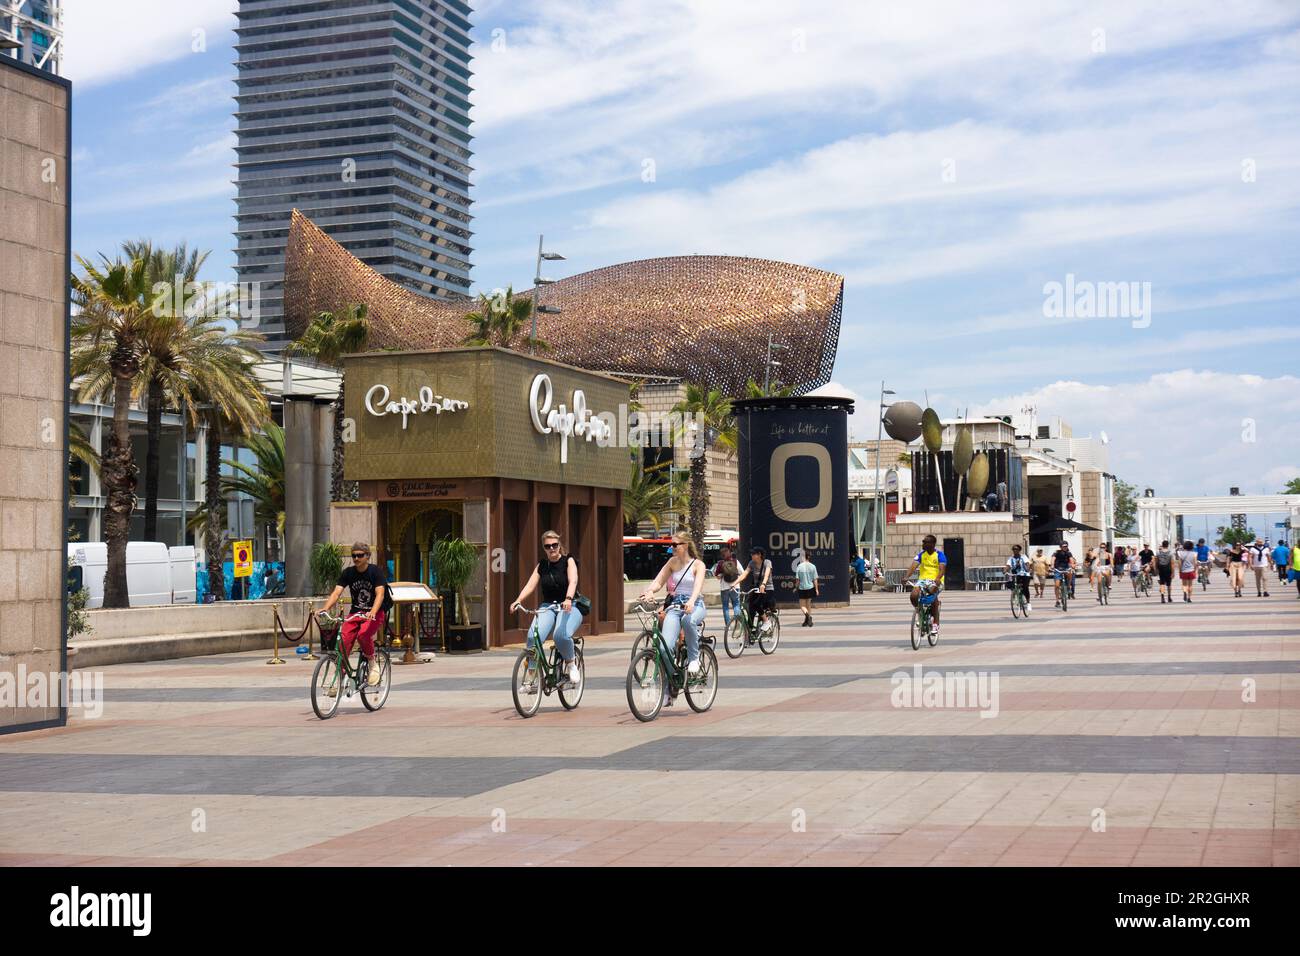 Wide pedestrian thoroughfare with cyclists along the beach in Barcelona, Spain near Olympic village.  Gehery's gold fish pavilion in background. Stock Photo